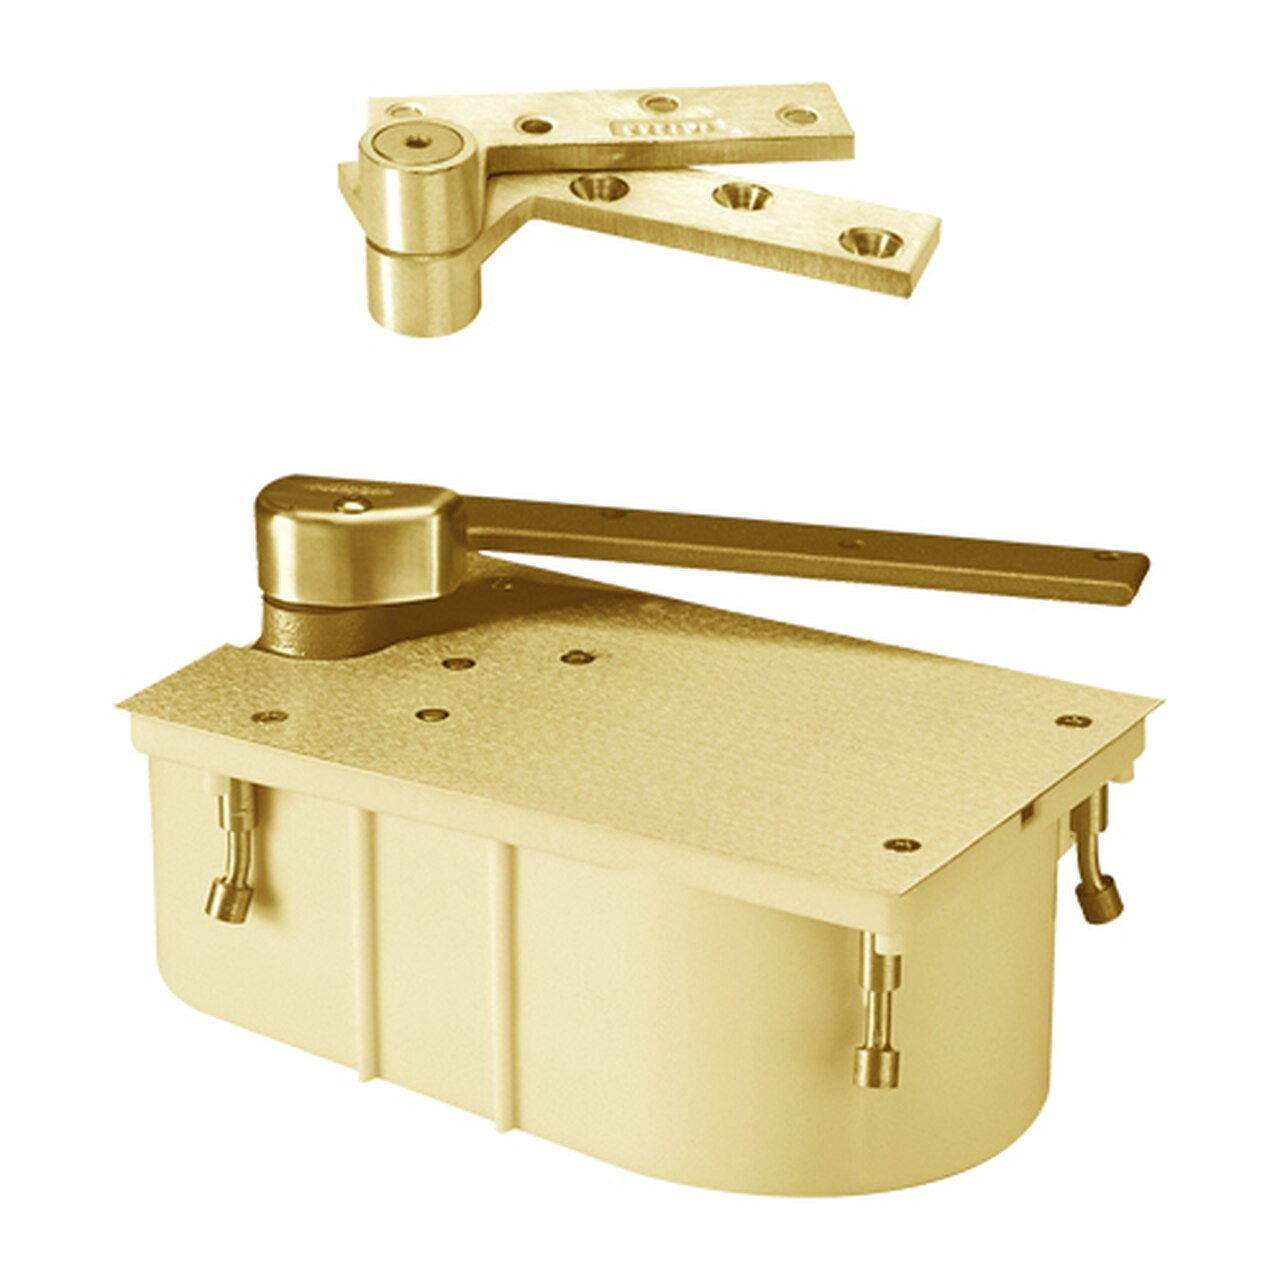 F27-85N-LTP-RH-605 Rixson 27 Series Fire Rated Heavy Duty 3/4" Offset Hung Floor Closer in Bright Brass Finish